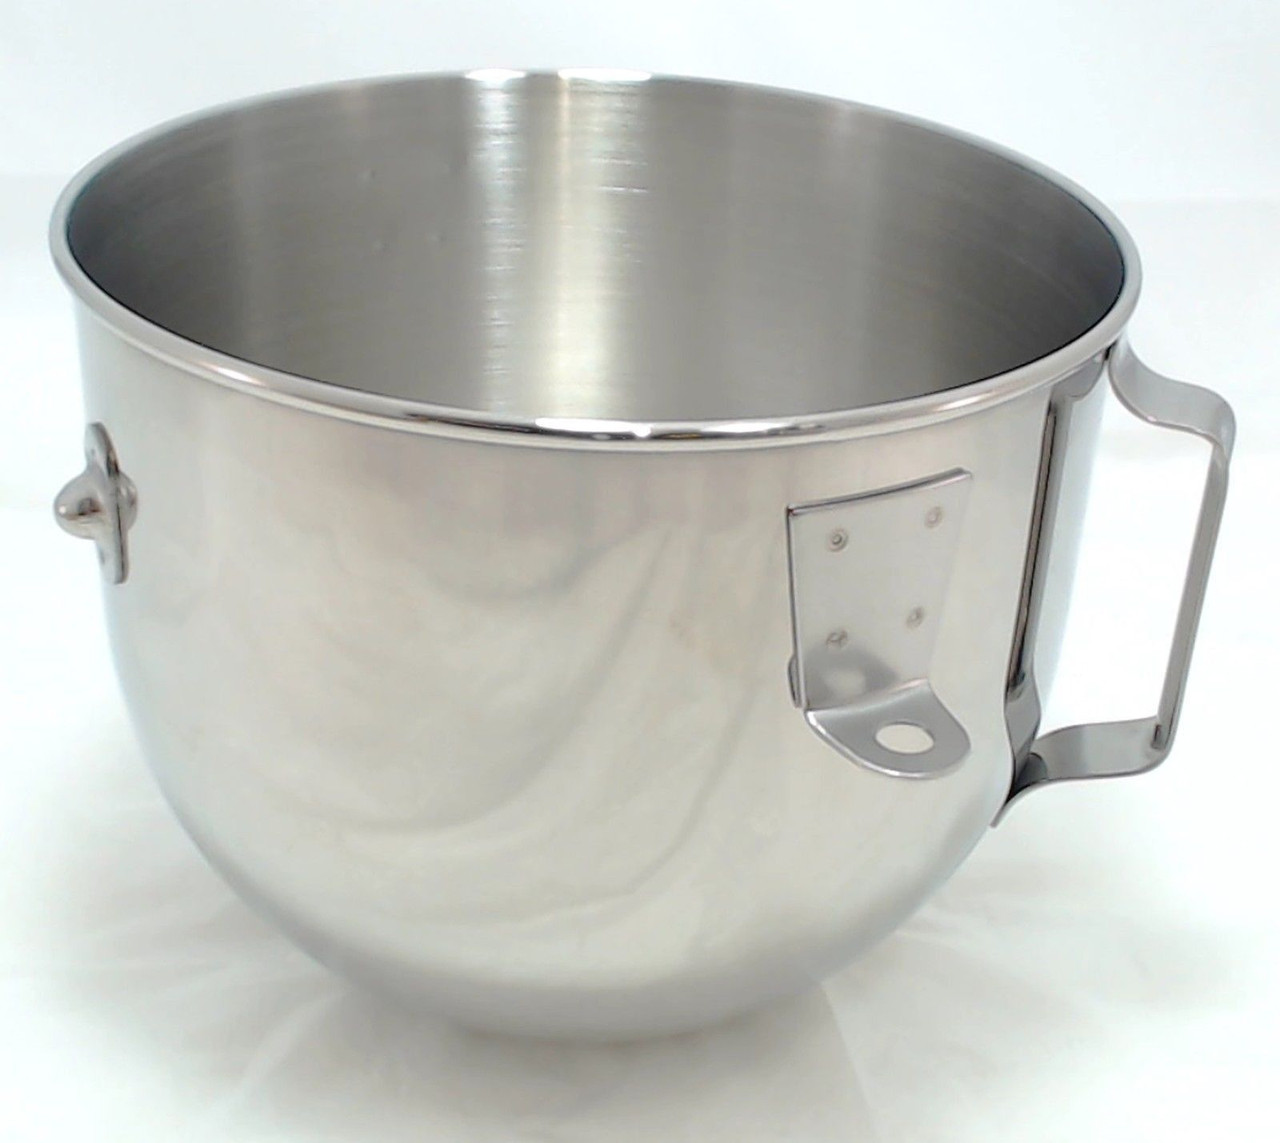 Kitchenaid Commercial 5 quart Stand Mixer KSMC50S with Bowl and Dough Hook